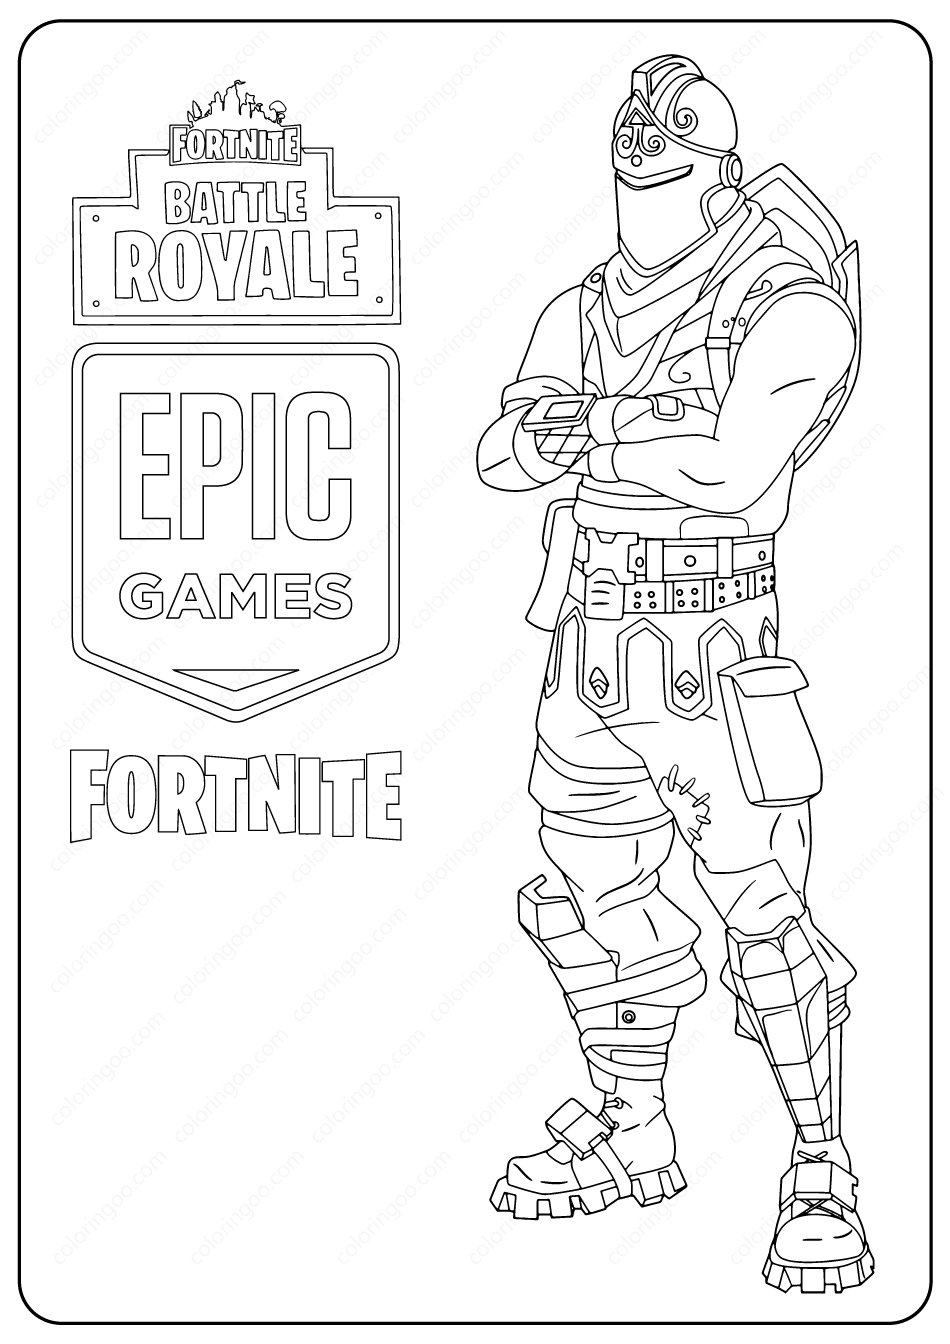 printable fortnite black knight skin coloring page